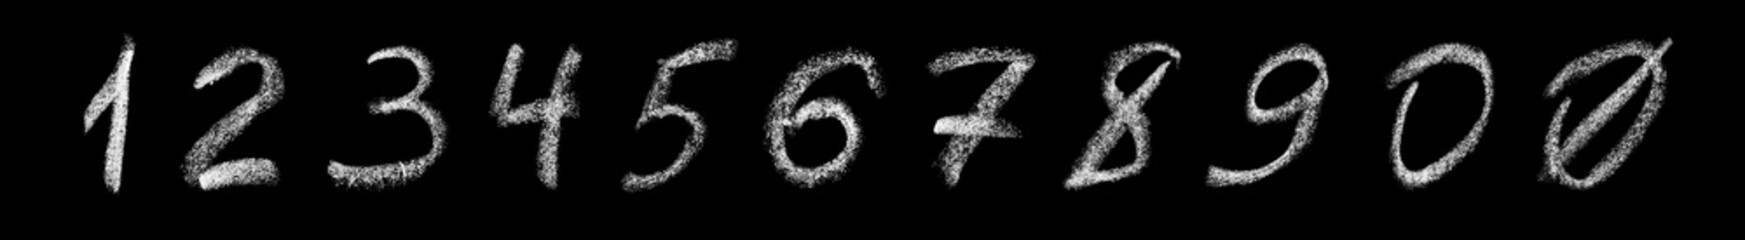 Set of arabic numbers handwritten in white chalk on a blackboard. Chalk numbers isolated on black...